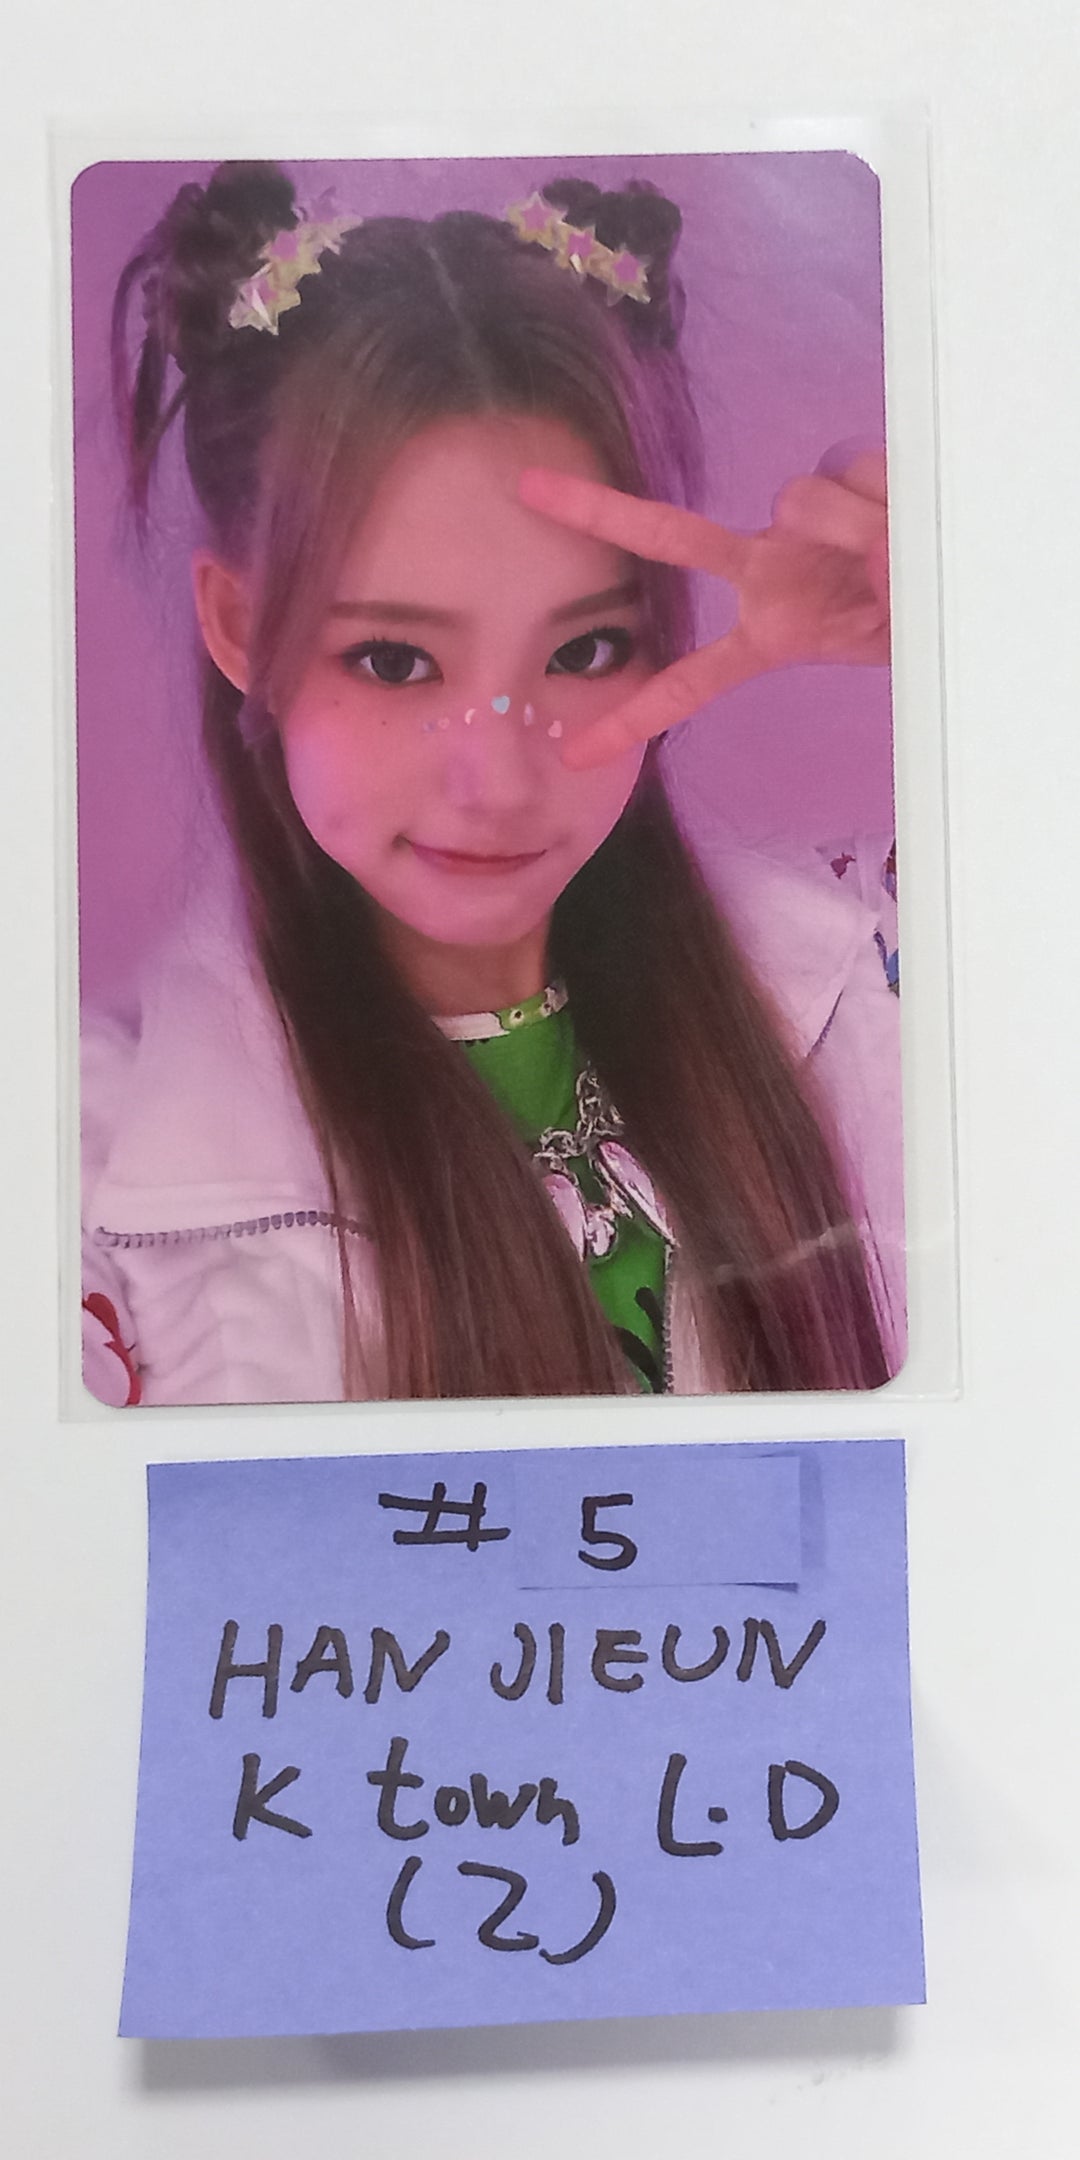 YOUNG POSSE "MACARONI CHEESE" - Ktown4U Lucky Draw Event Photocard [23.10.20]